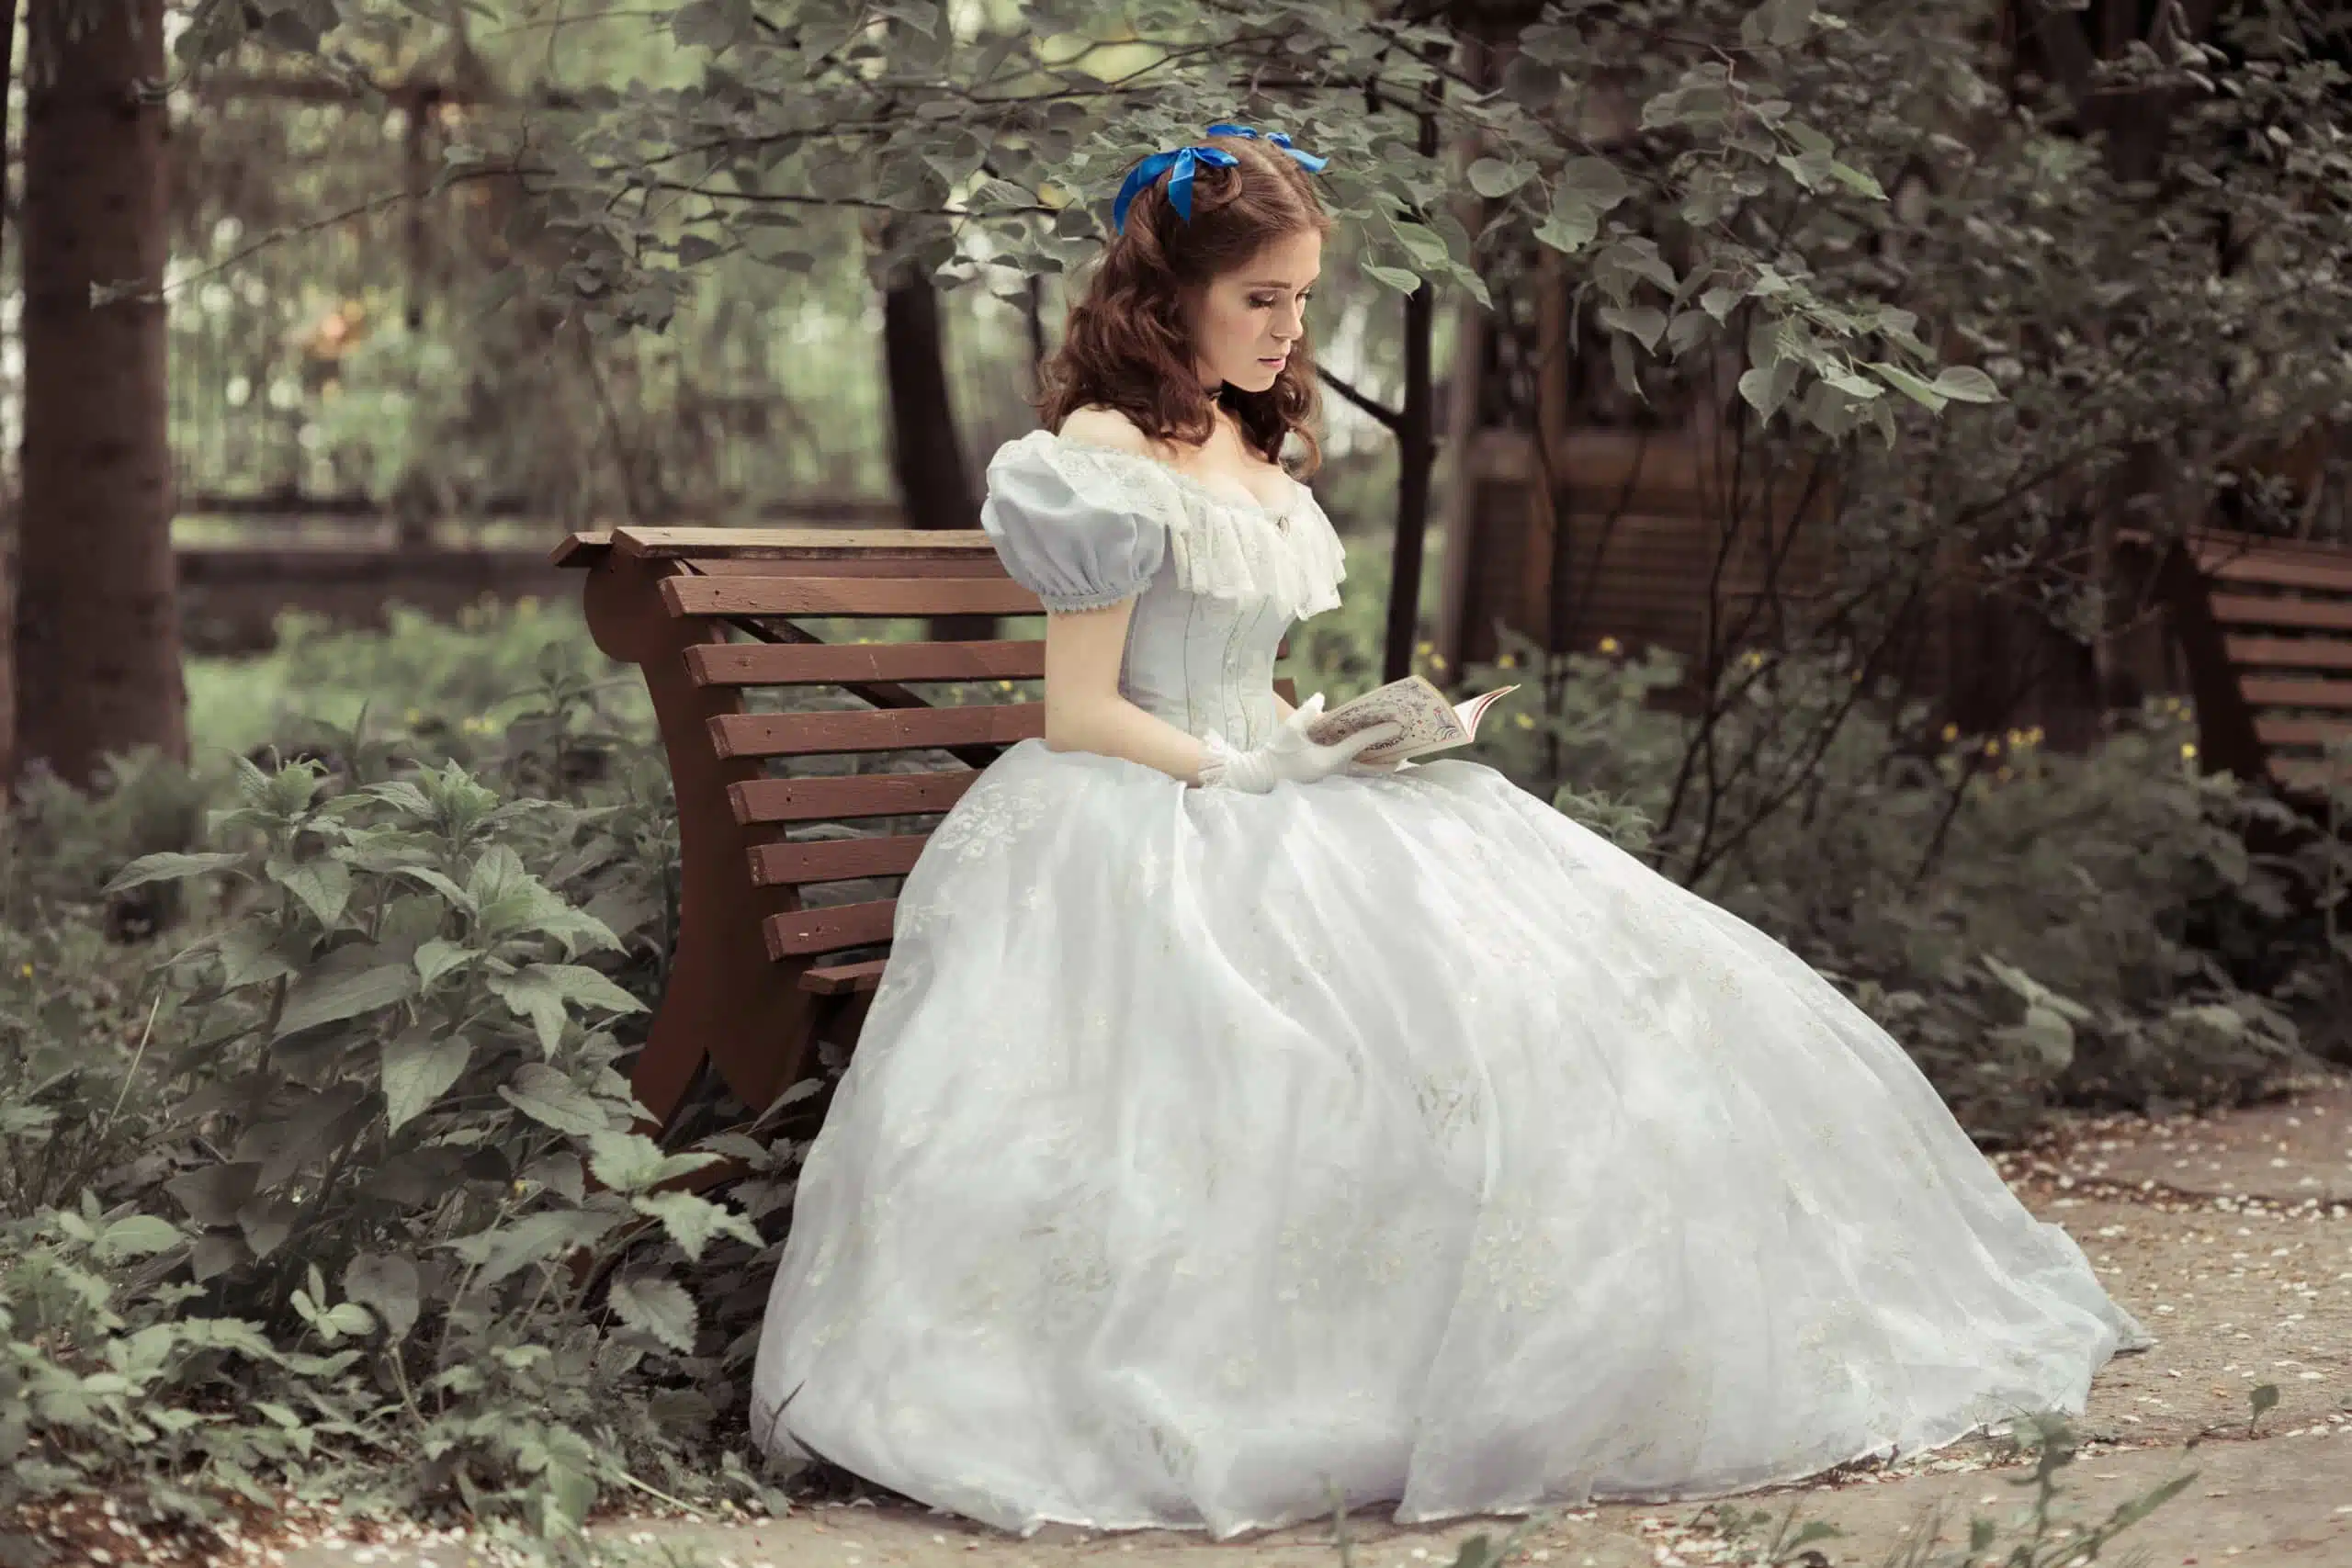 A young beautiful medieval girl in a white dress, reading a book in the garden.